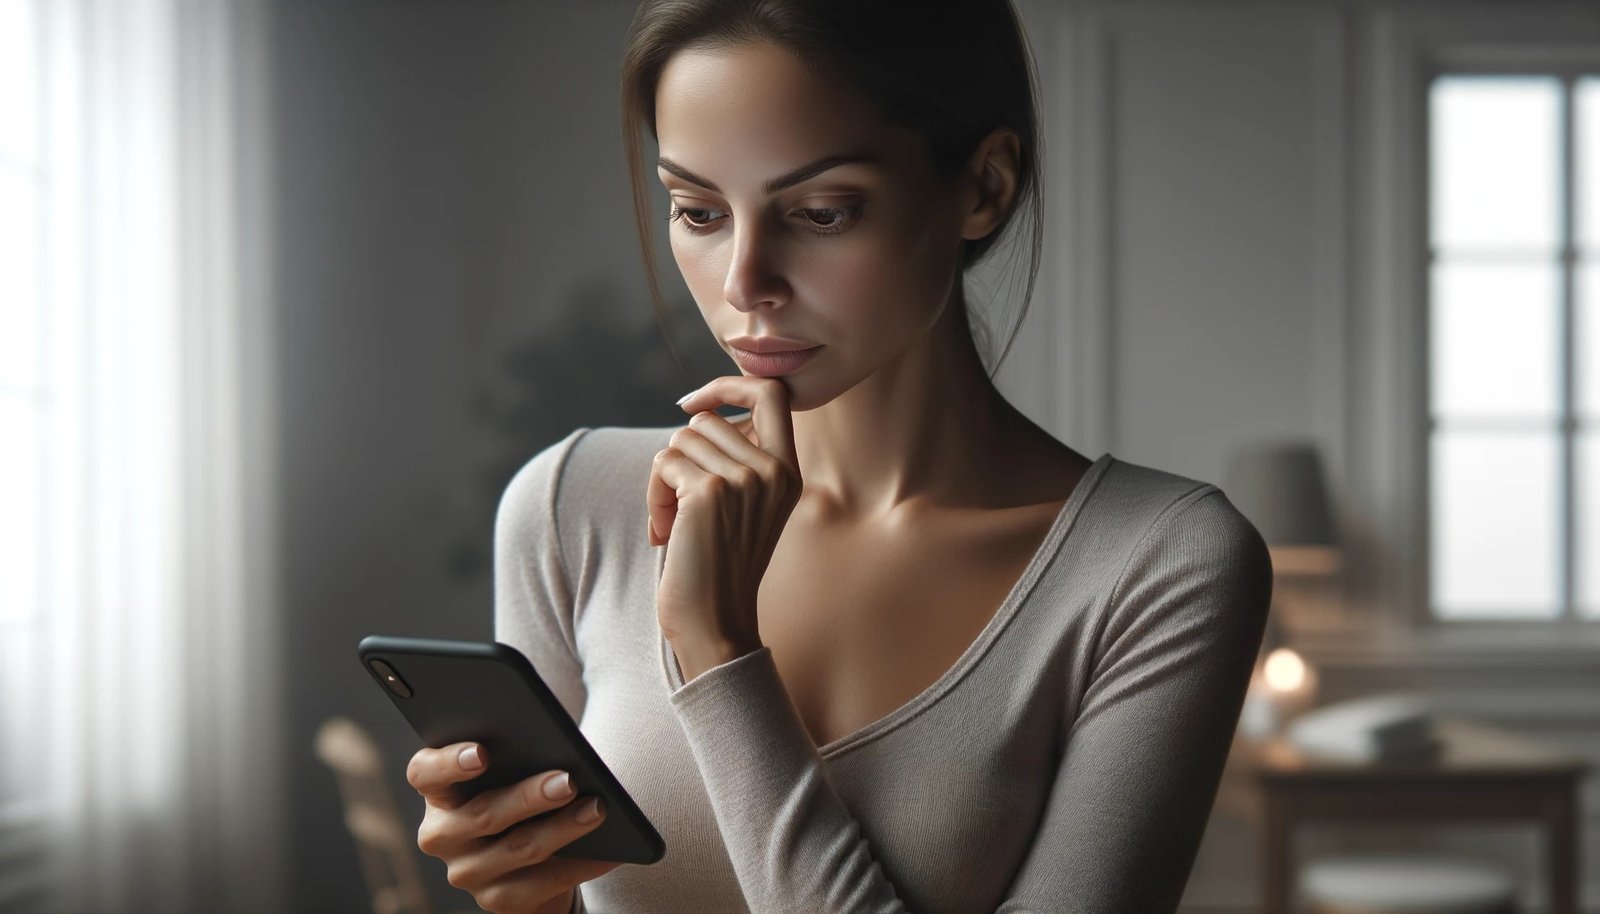 A woman gazing with indecision at her smartphone.